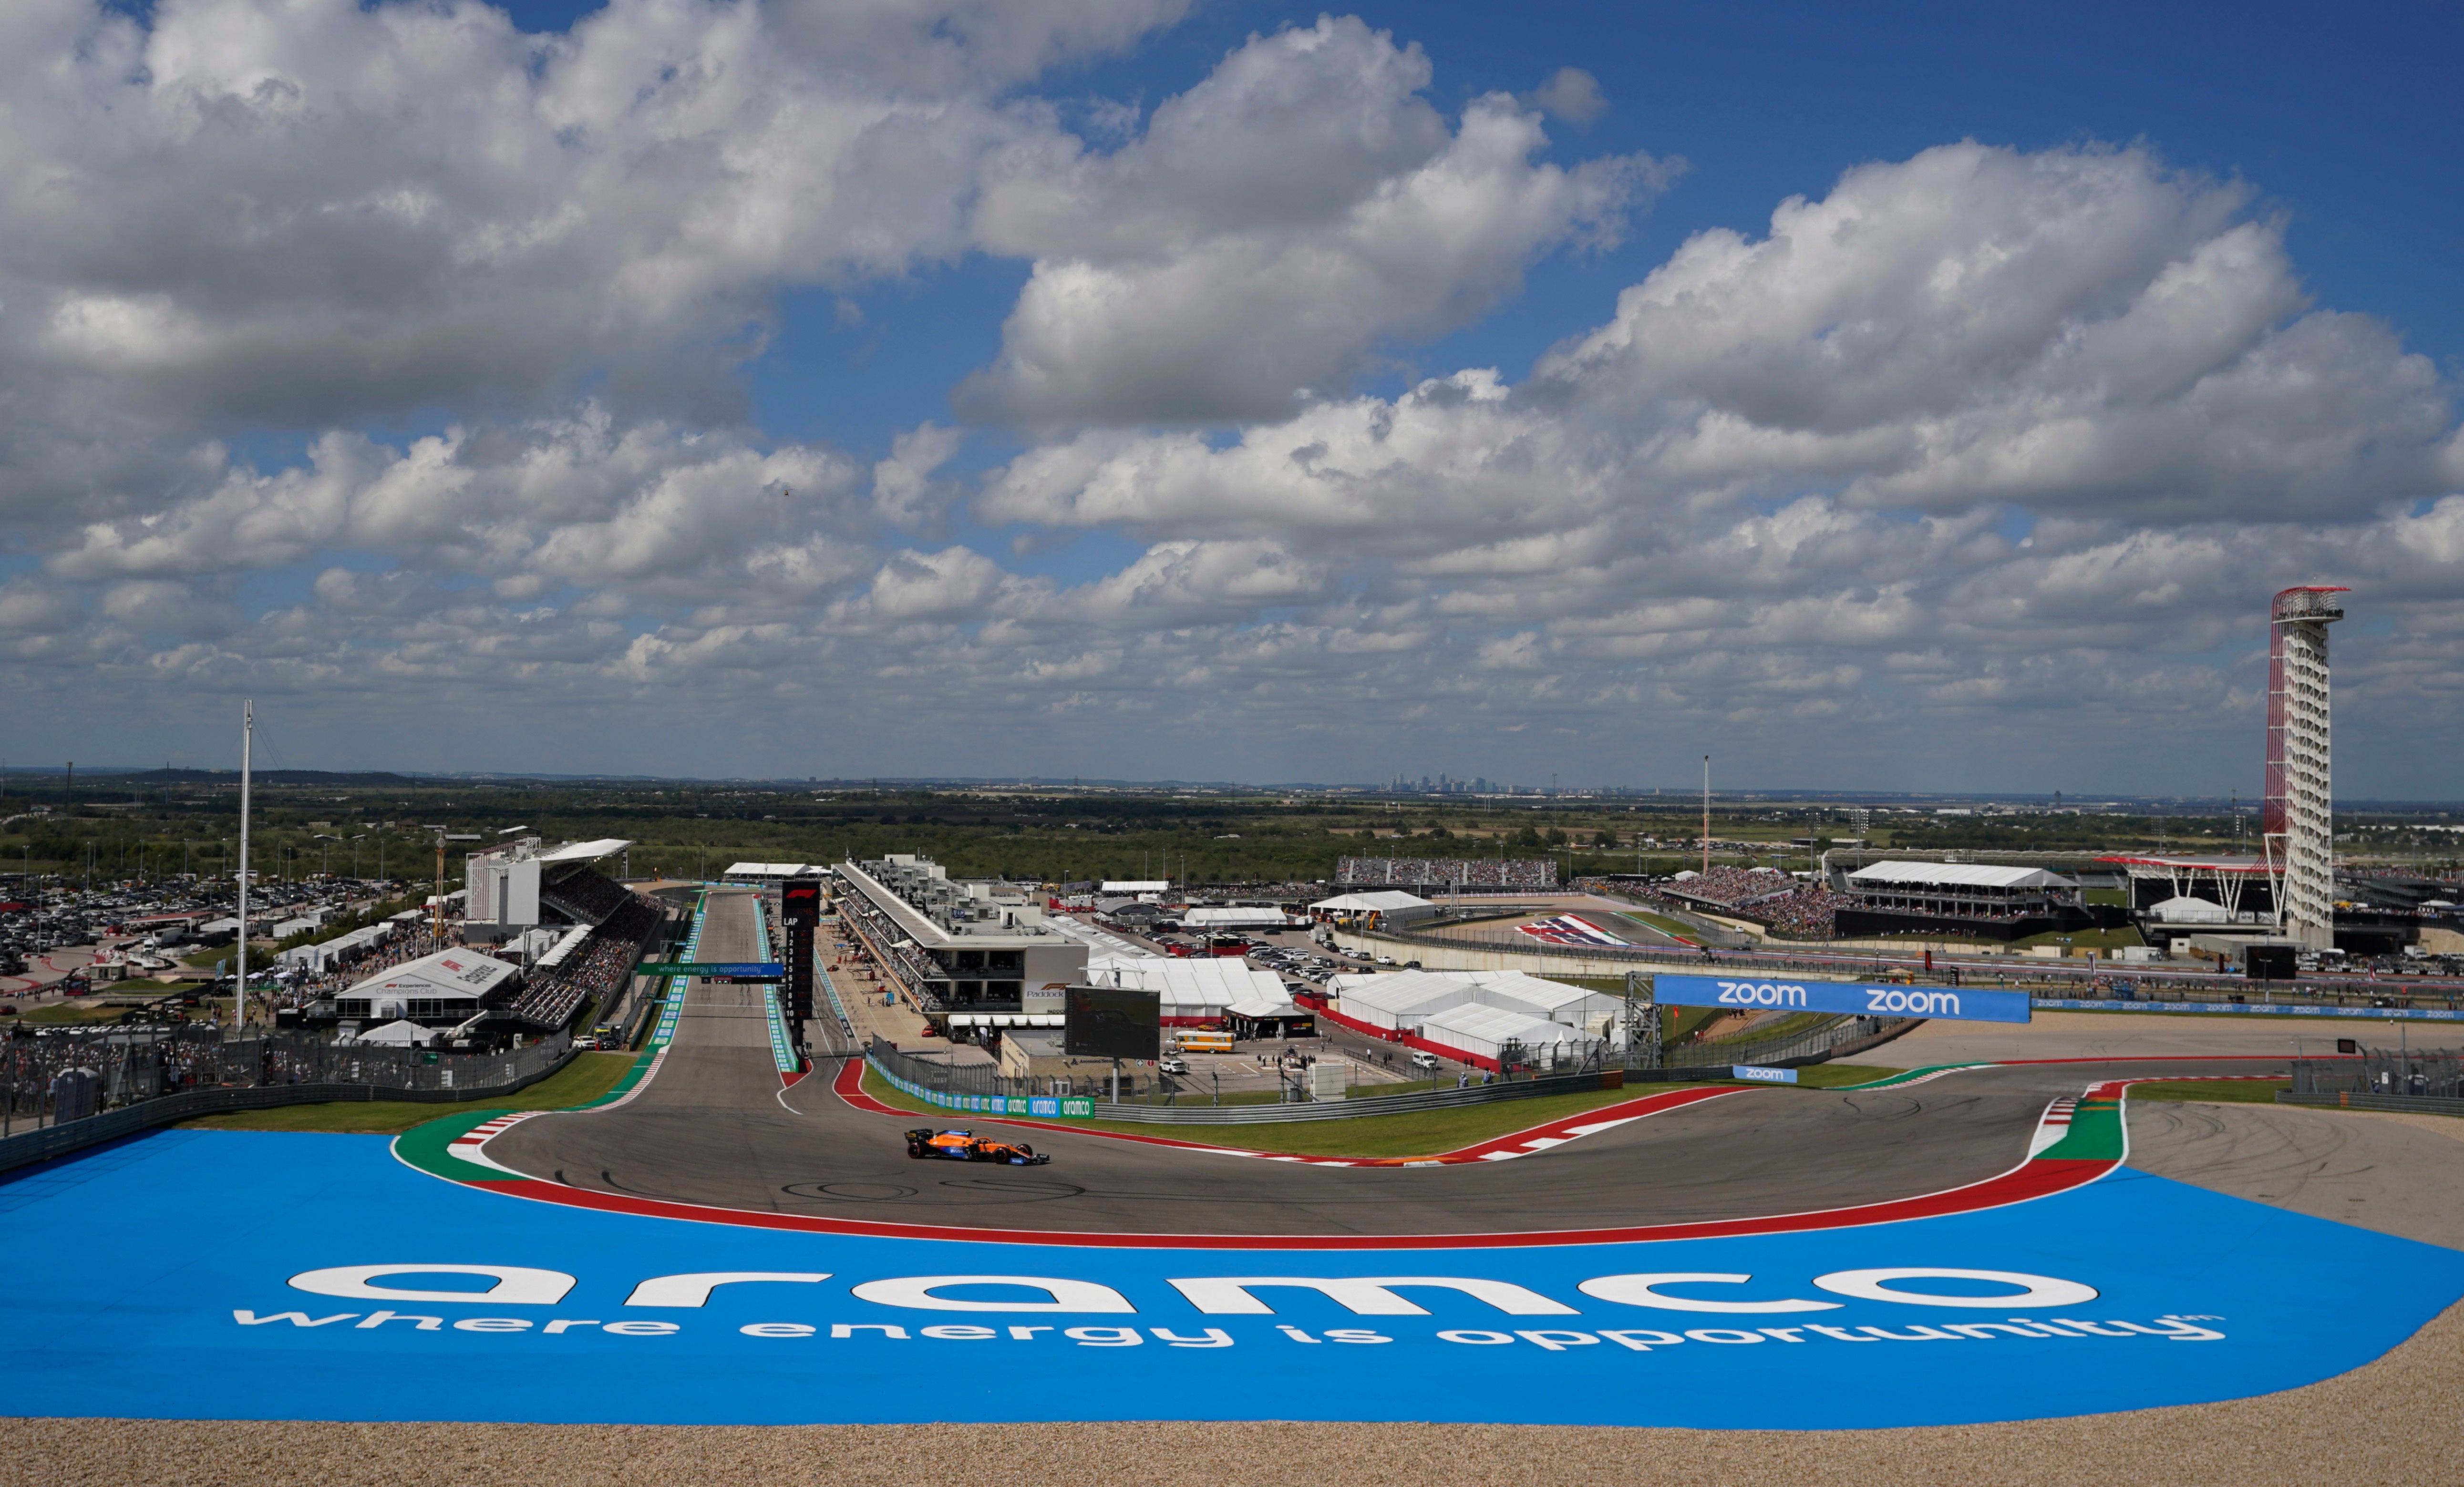 Turn one of the US Grand Prix in Texas